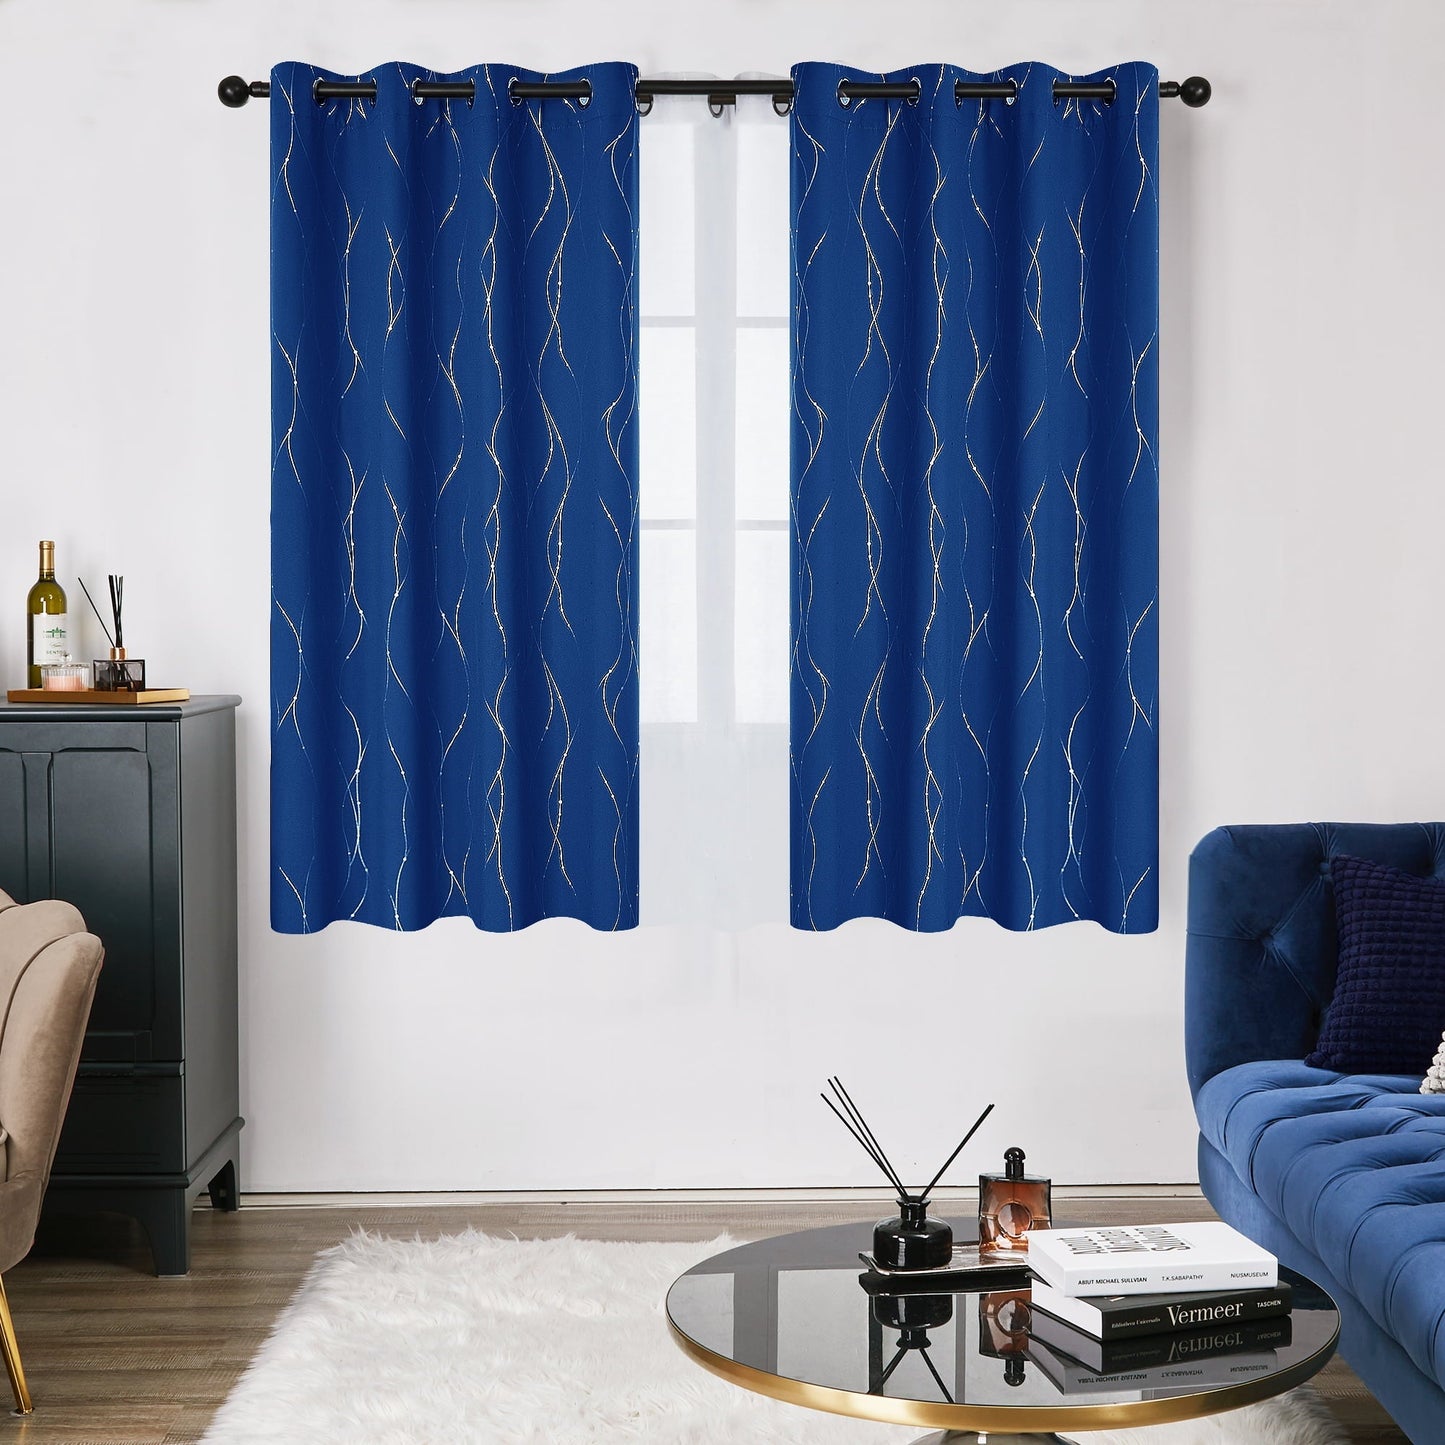 Curtain 2 Panels Size 52x63 Inches Color Royal Blue